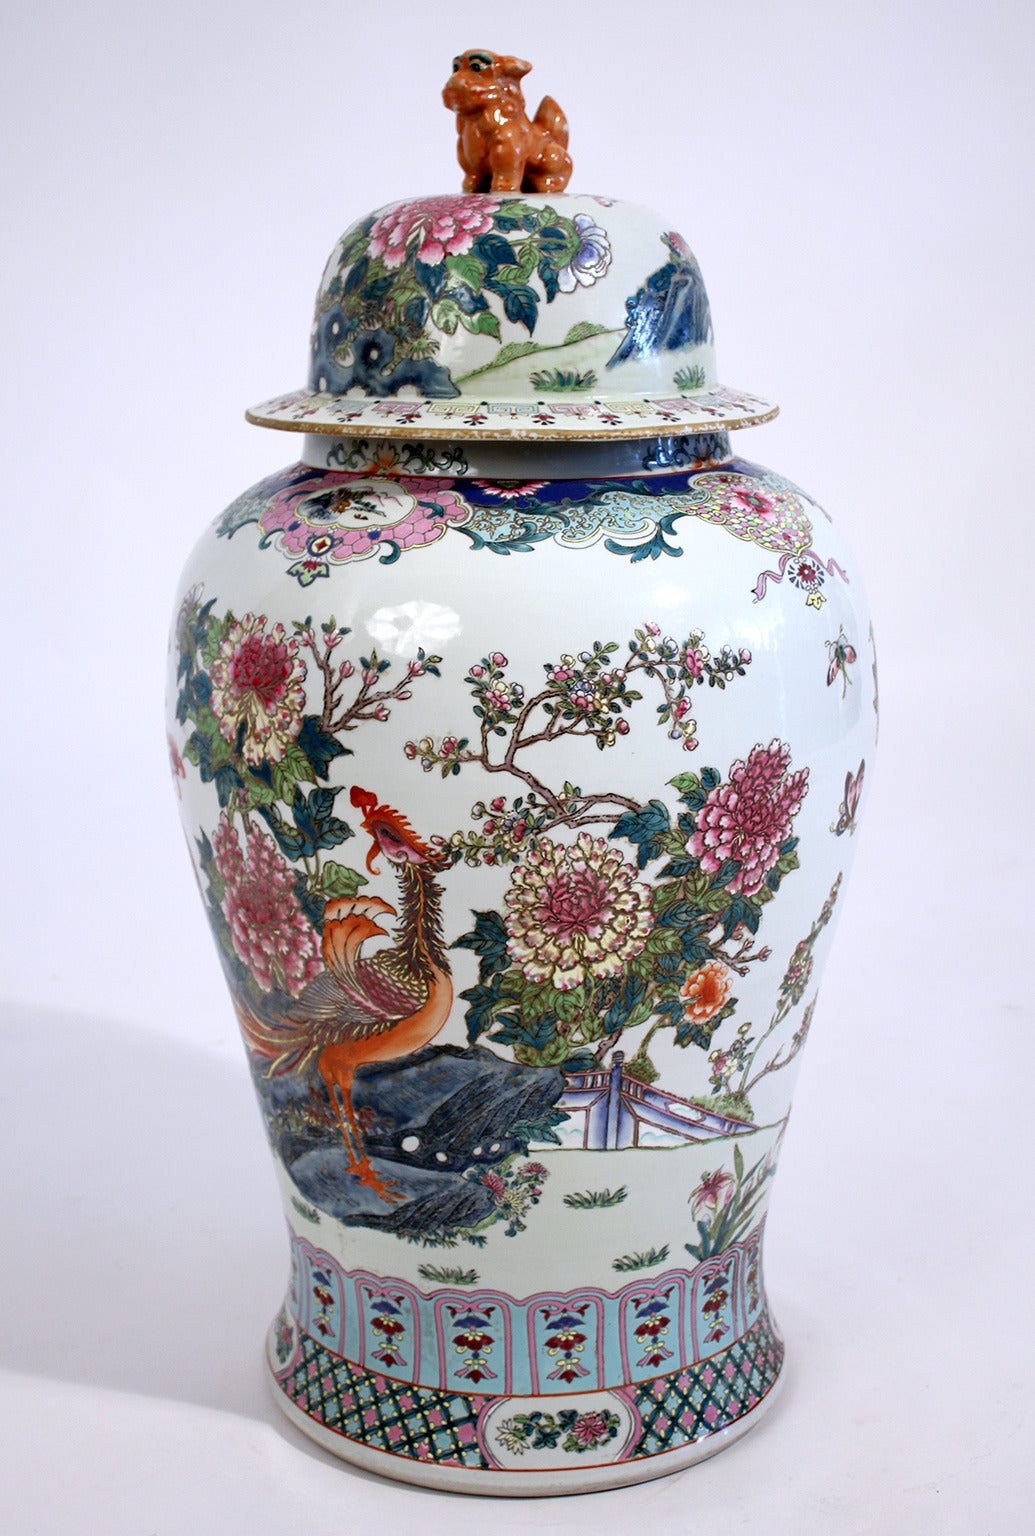 Large Chinese porcelain enamel painted lidded floor vase with mythic phoenix birds and chrysanthemum floral decoration. Figural lion dog top handle.